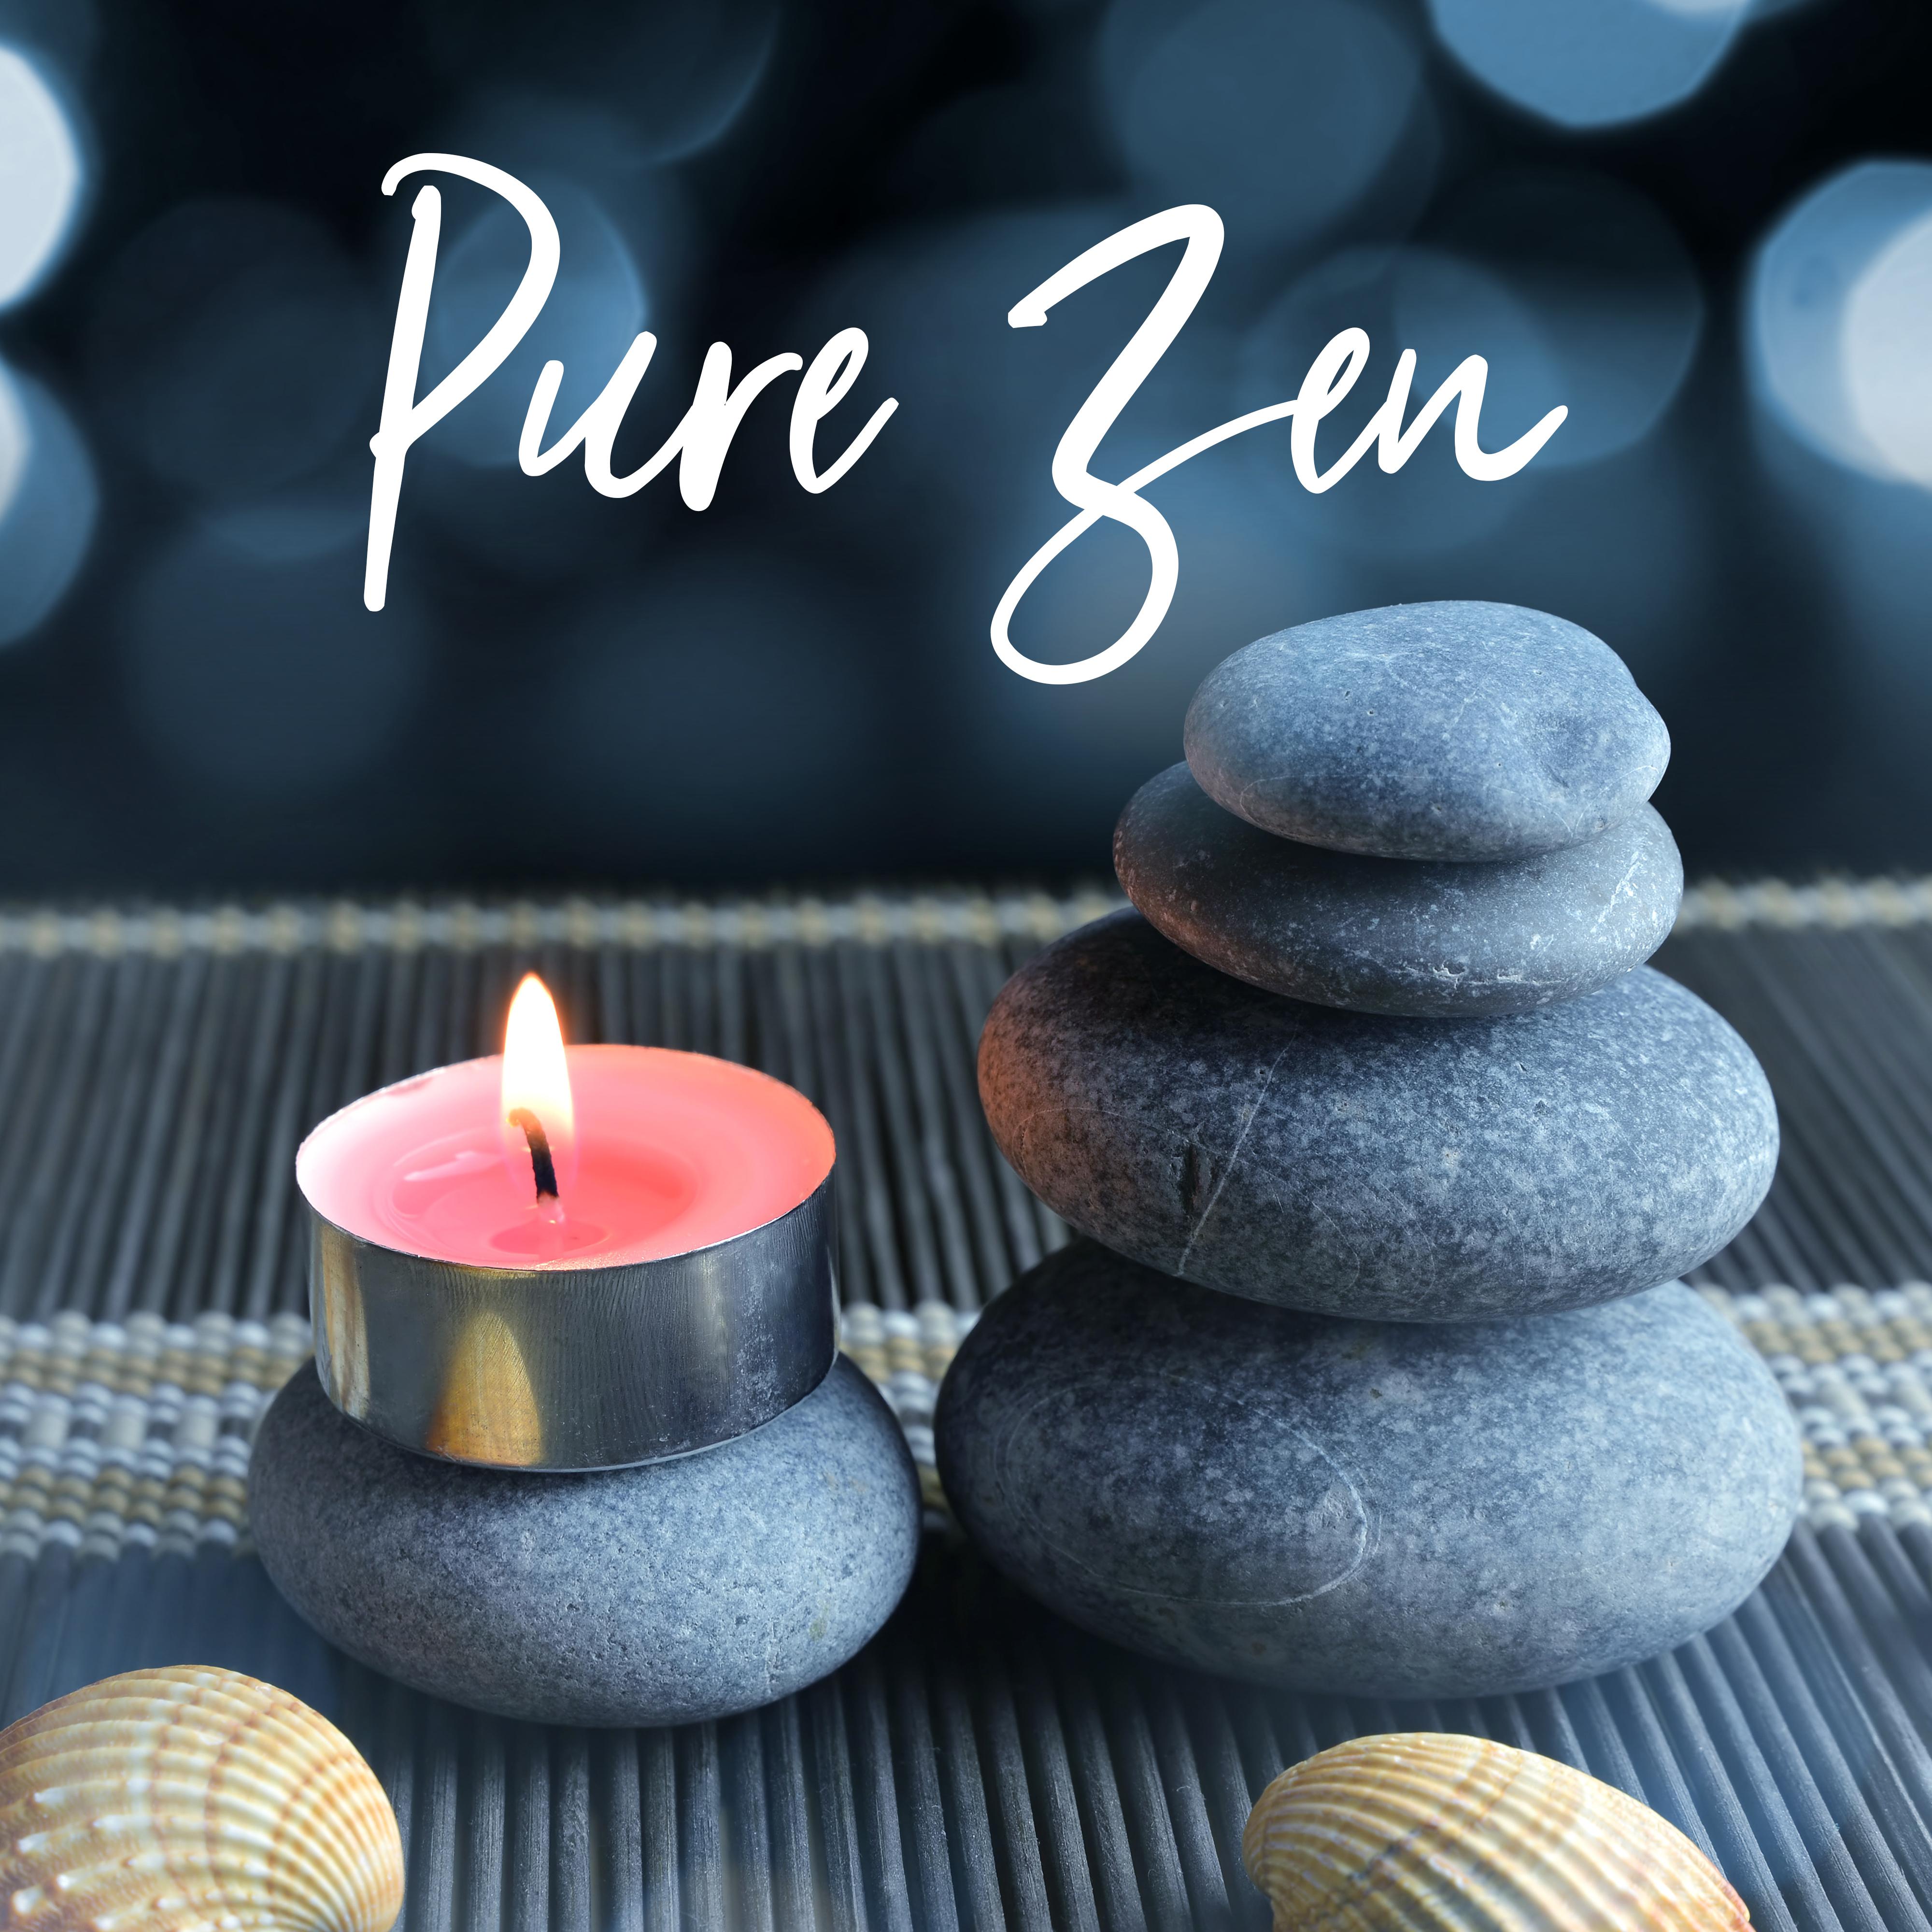 Pure Zen – Meditation Music Zone, Chakra Balancing, Stress Relief, Inner Balance, Asian Relaxation, Lounge Music, Ambient Yoga, Relaxing Music Therapy, Inner Bliss